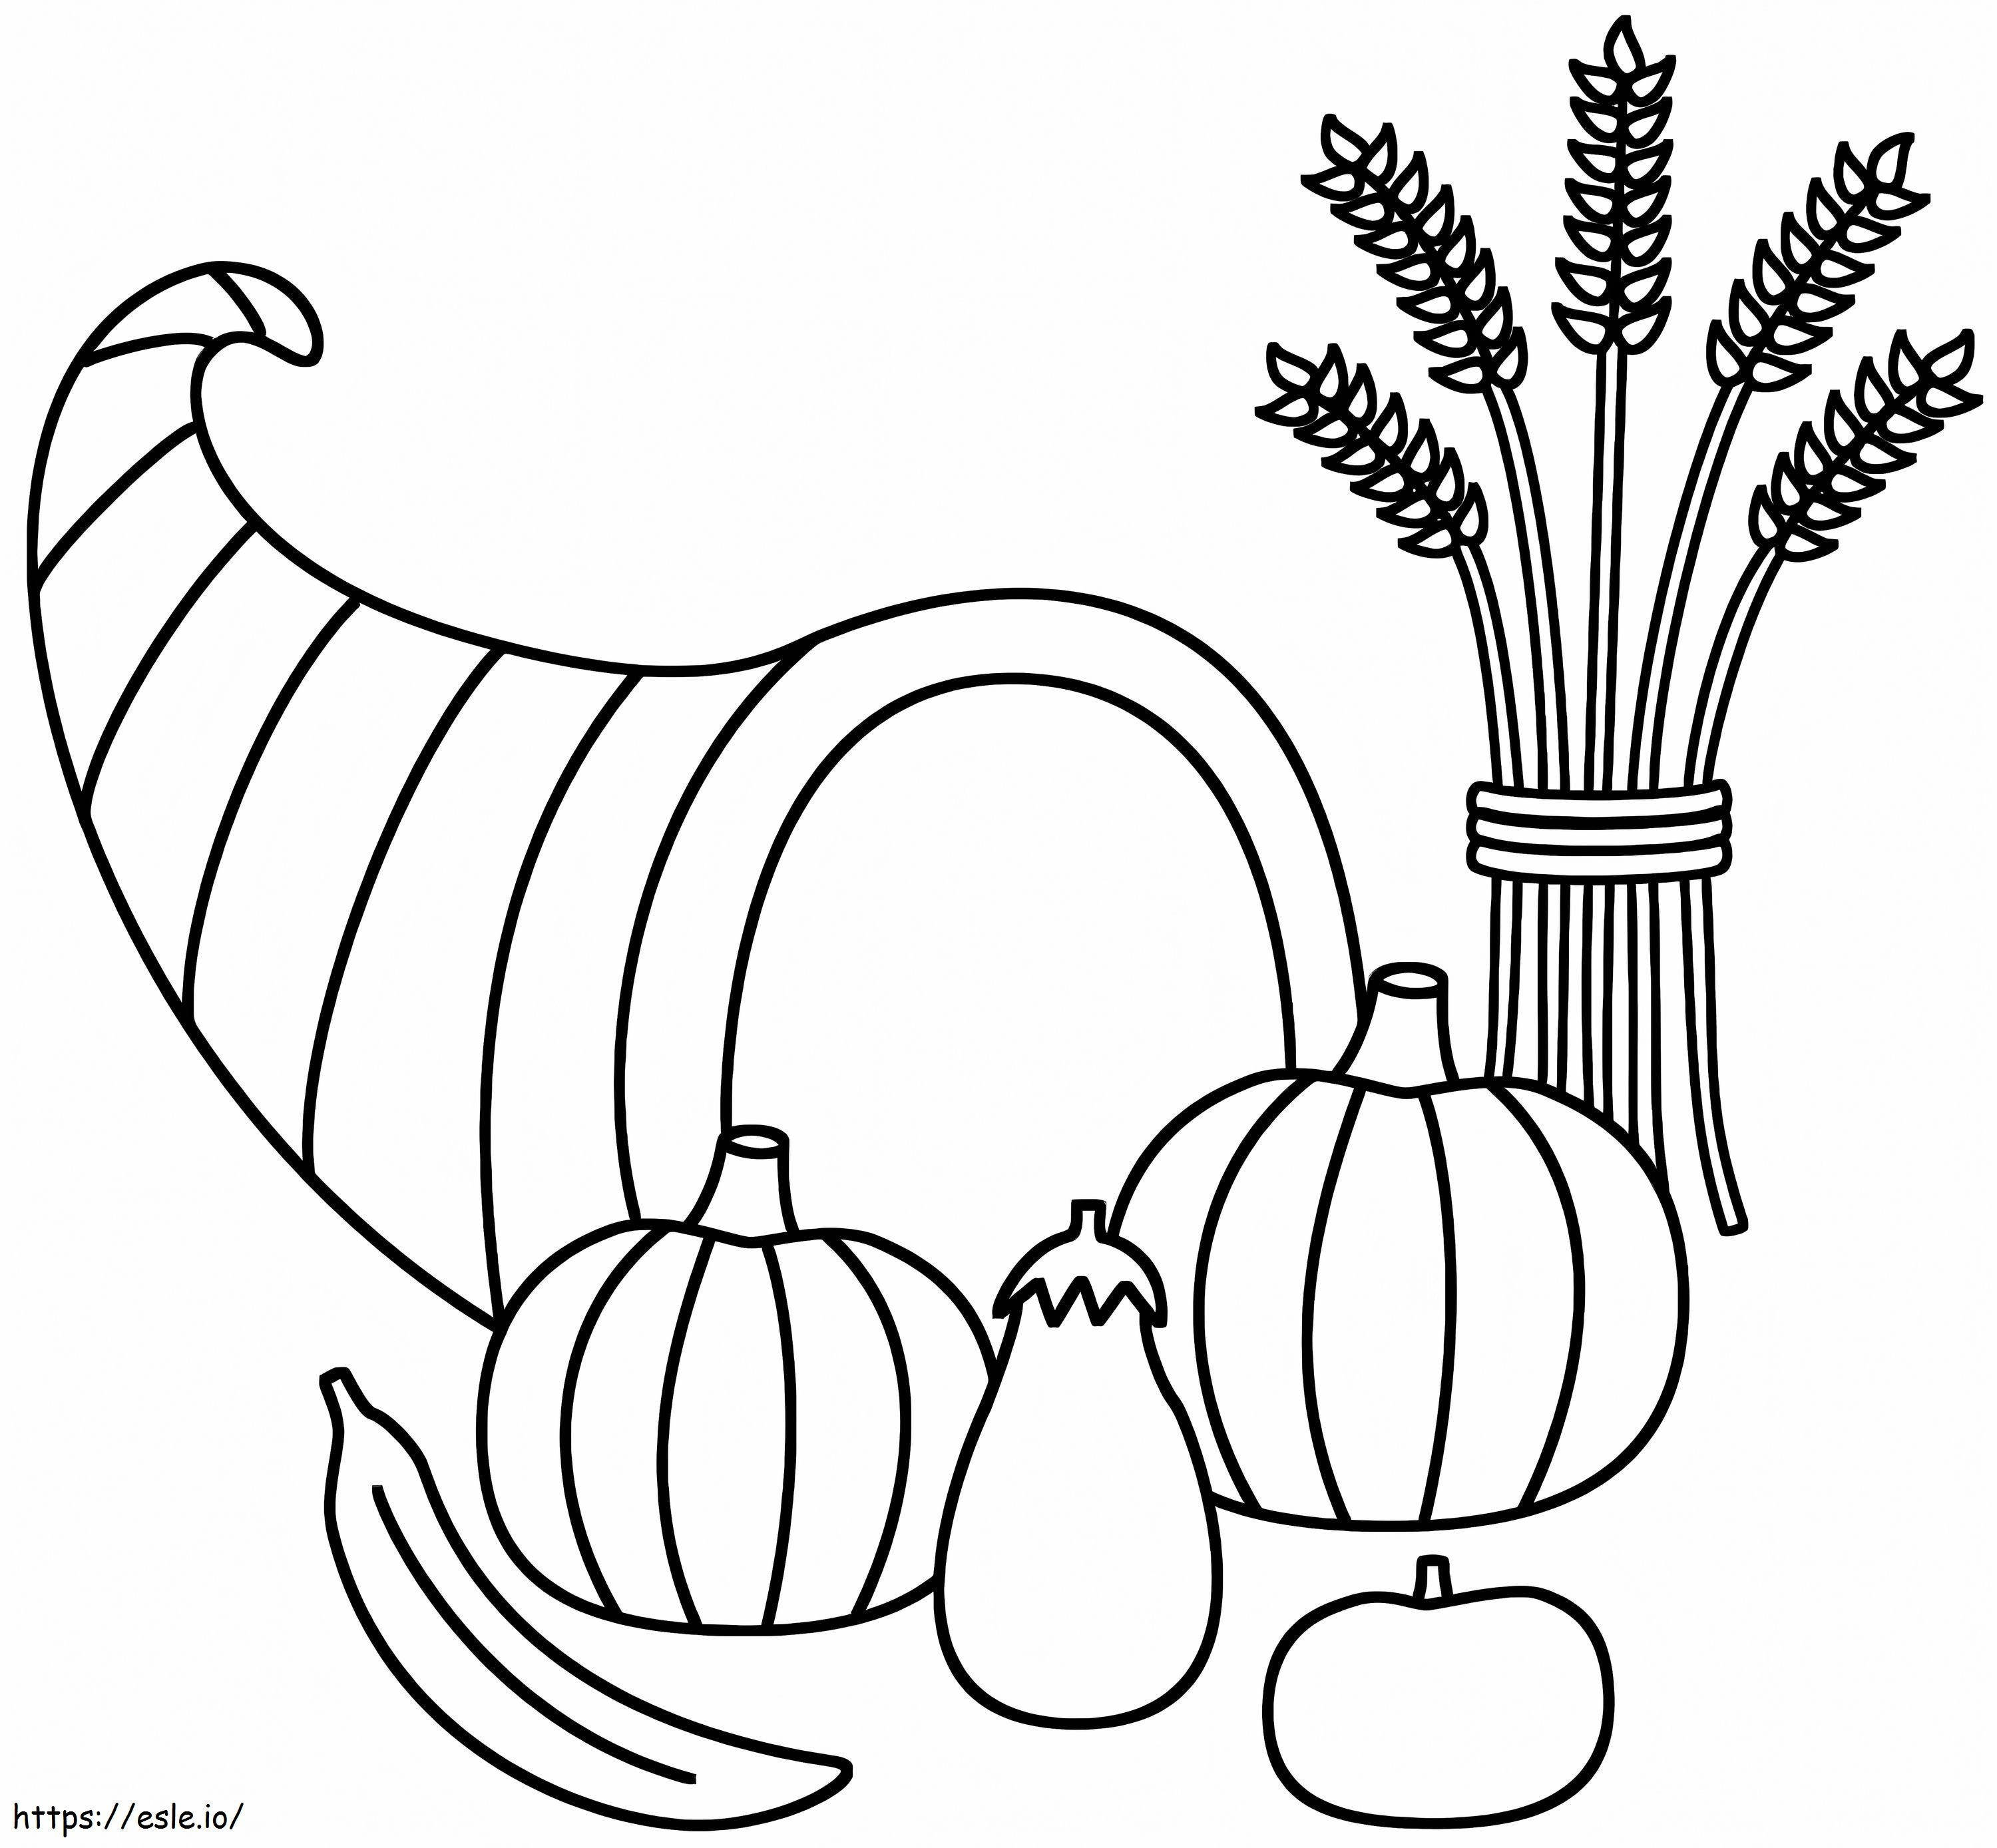 Horn Of Plenty With Sheaf Of Wheat coloring page